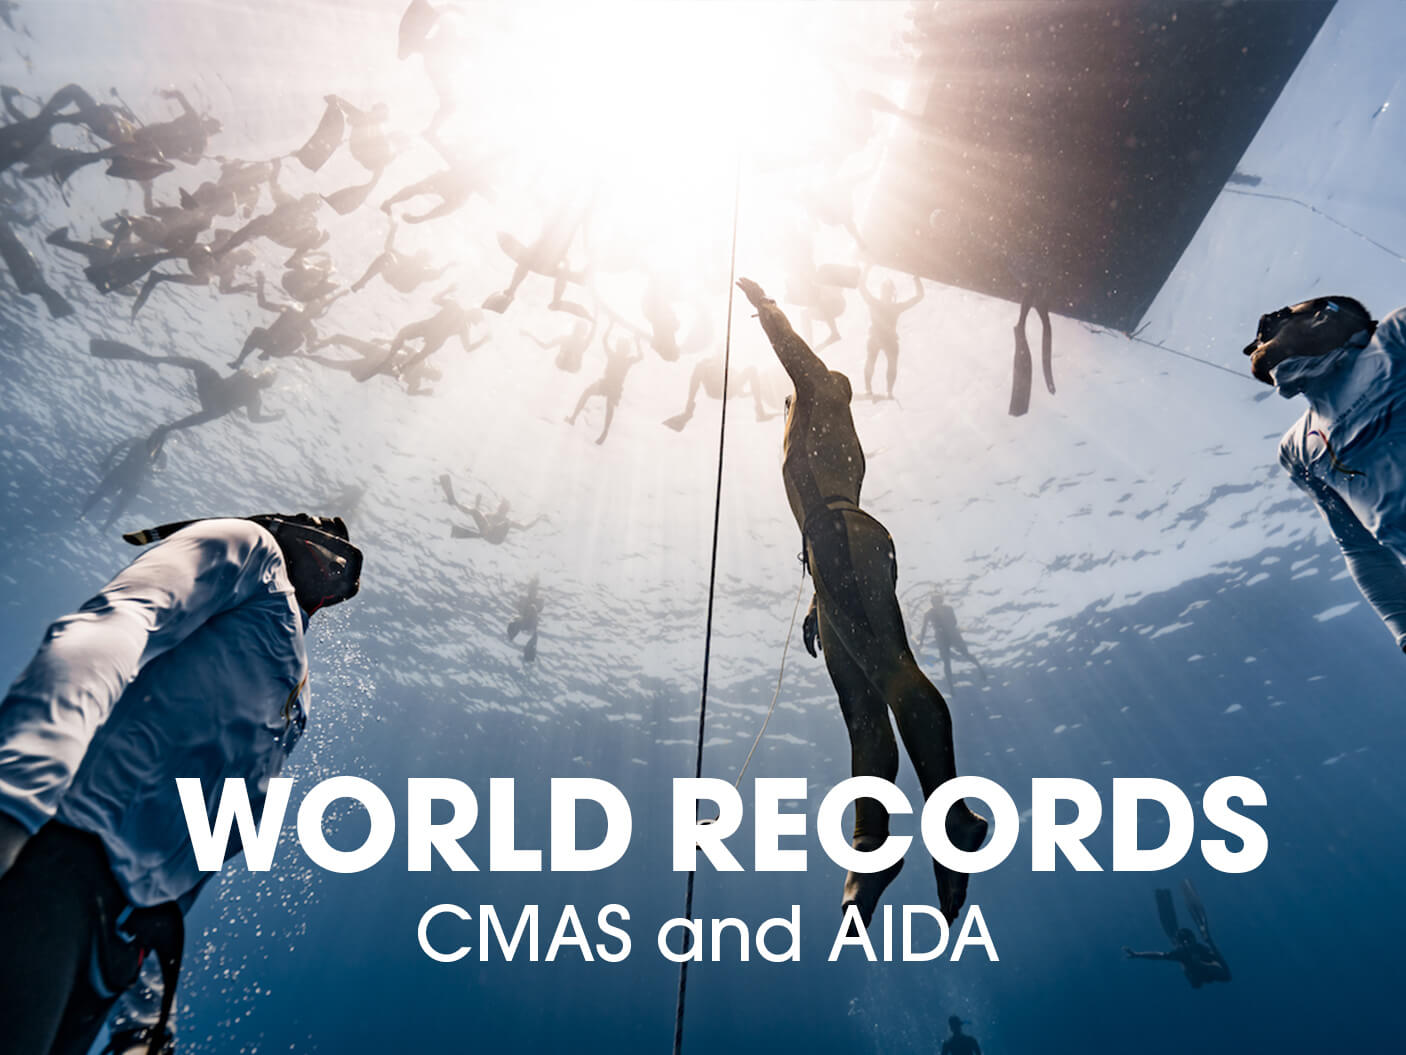 Current CMAS and AIDA Freediving World Records